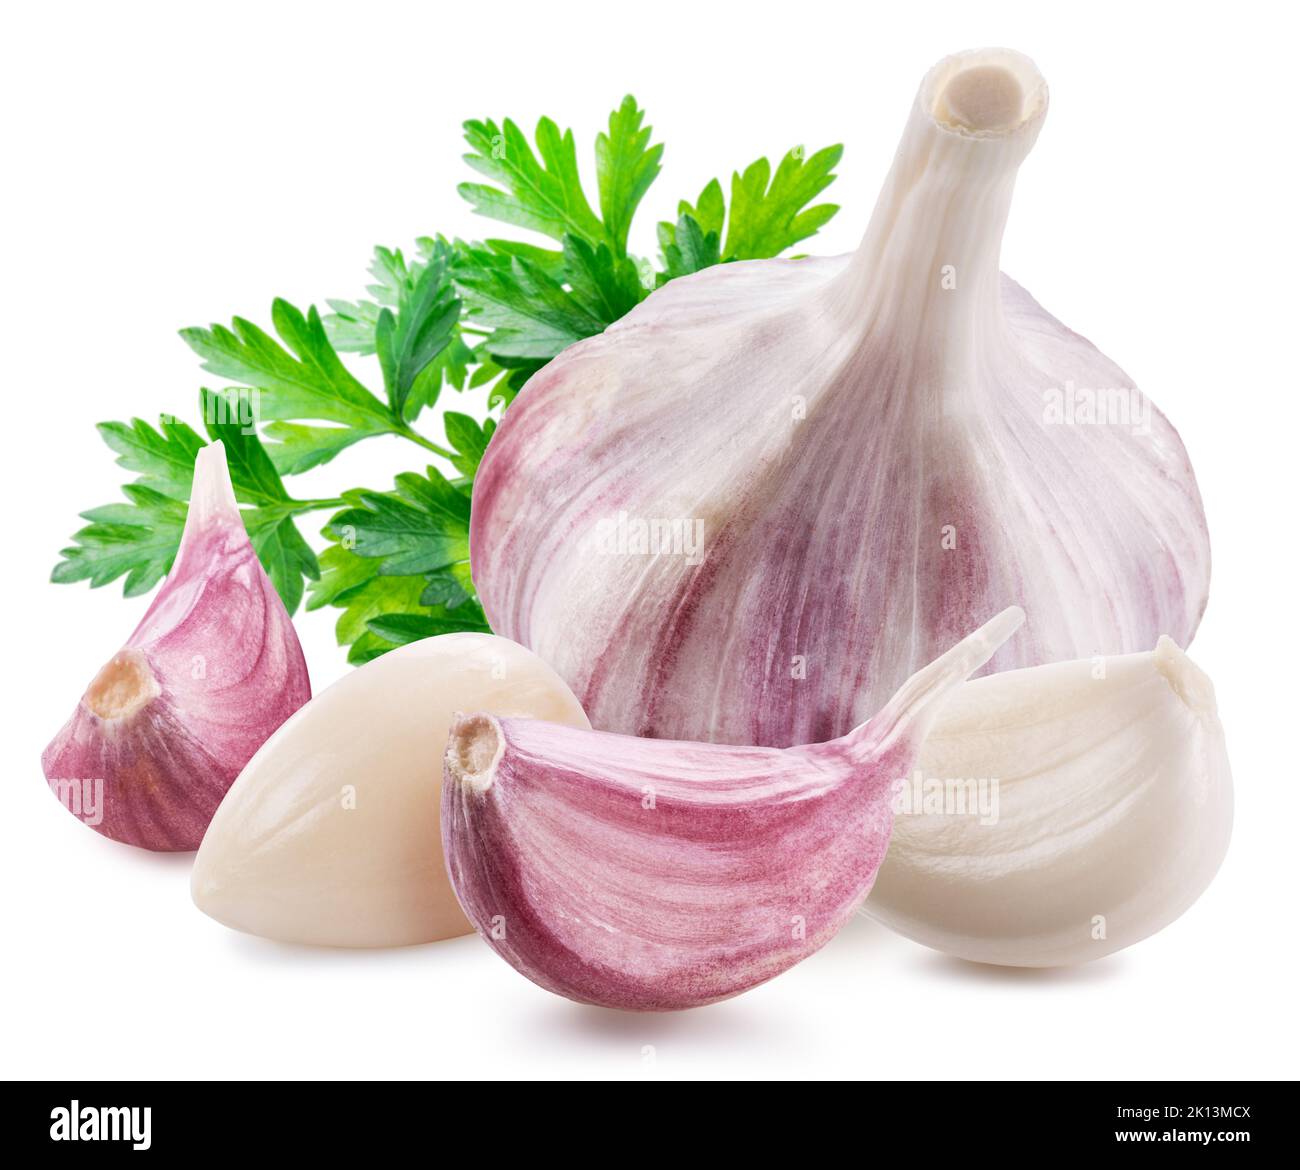 Head of young garlic with garlic cloves and parsley leaf isolated on white background. Stock Photo